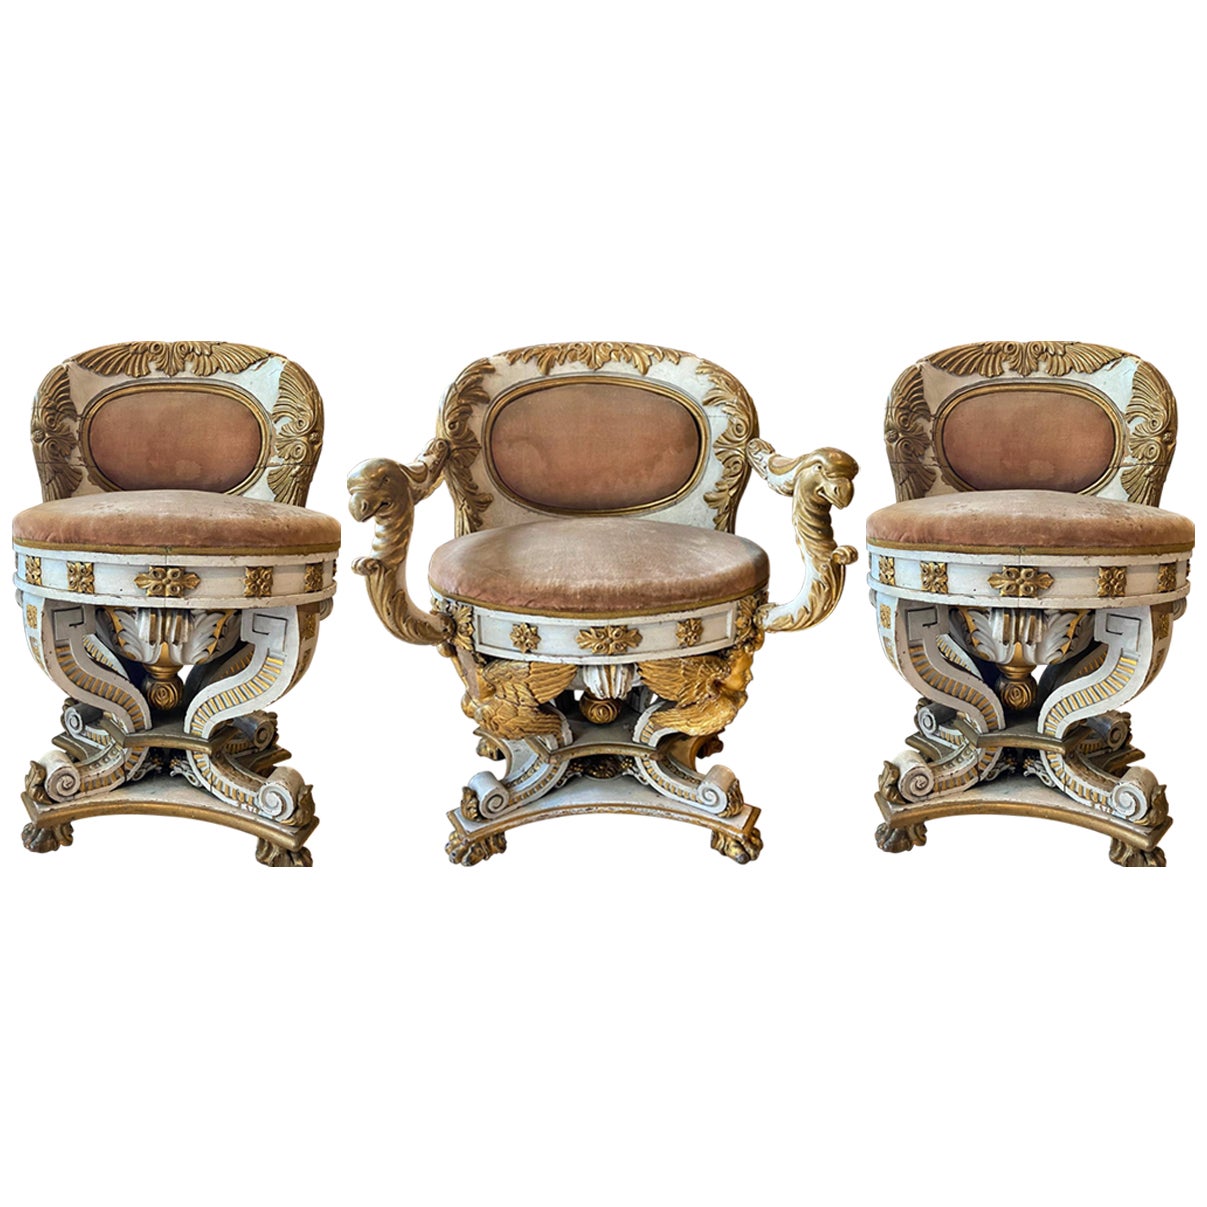 Amazing Set of Armchair and 2 Chair First Empire Napoleon III Early 19th Century For Sale